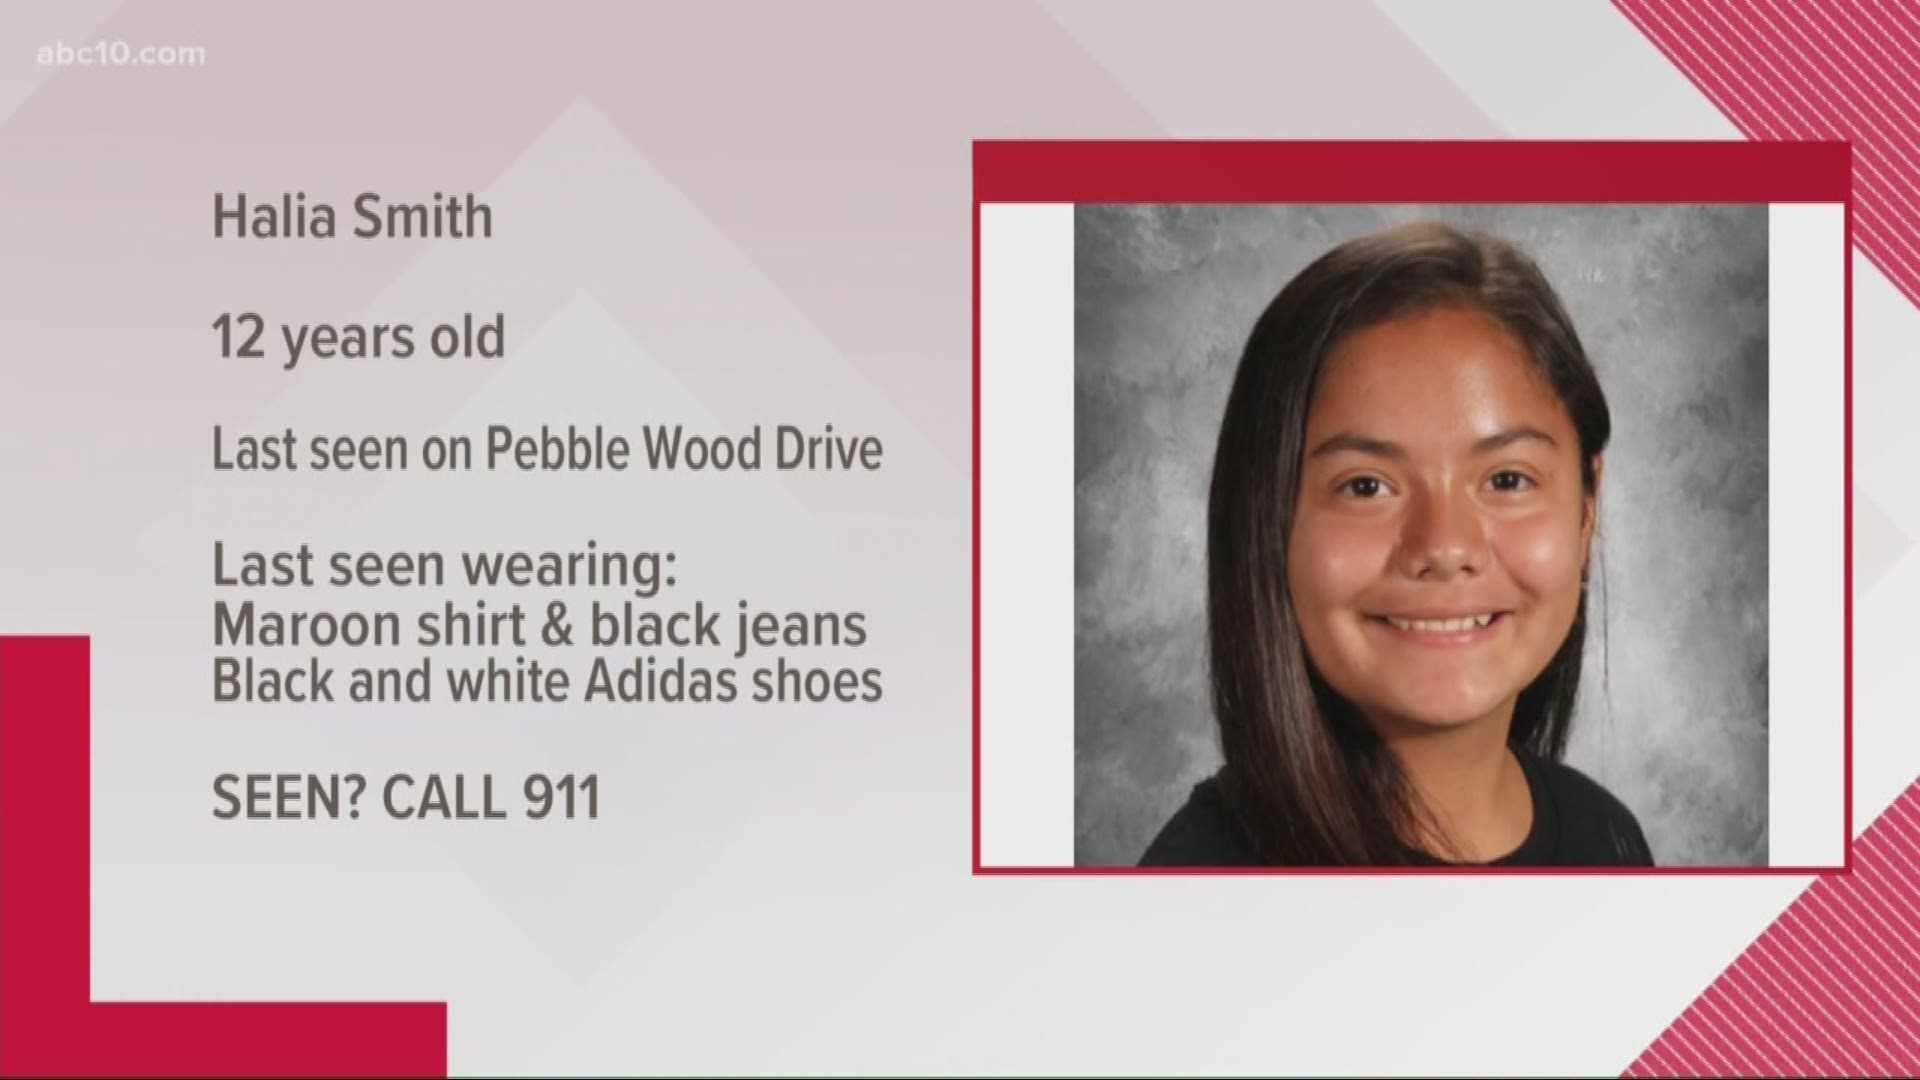 Authorities say Halia Smith was last seen around 2:30 p.m. in the 2000 block of Pebble Wood Drive, near Jefferson School, where investigators say she attends the 7th grade.